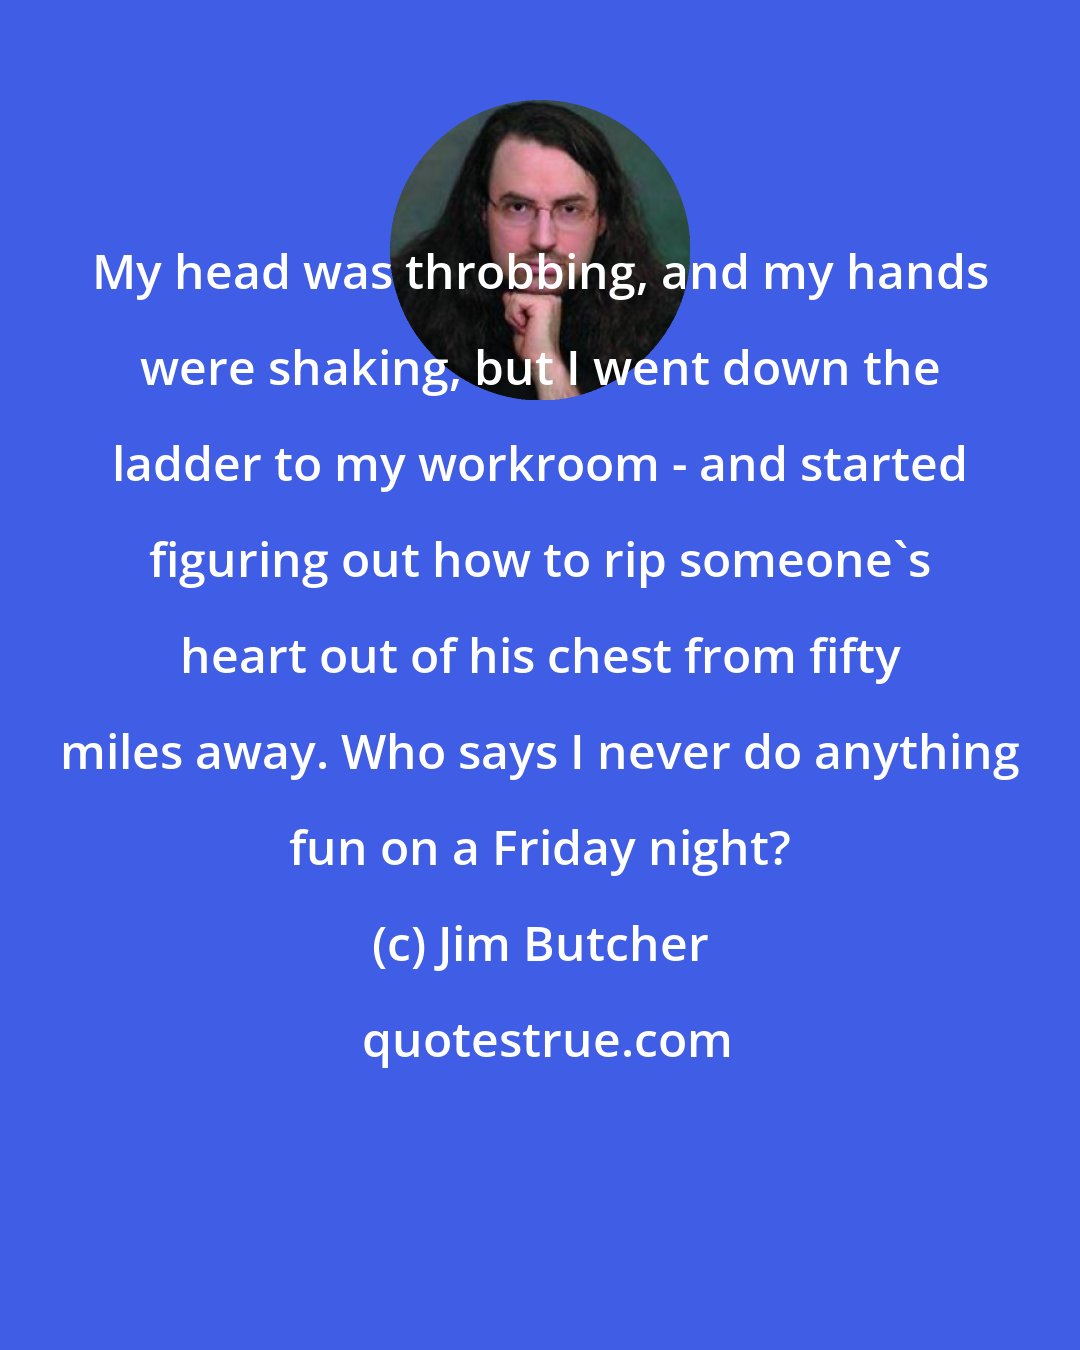 Jim Butcher: My head was throbbing, and my hands were shaking, but I went down the ladder to my workroom - and started figuring out how to rip someone's heart out of his chest from fifty miles away. Who says I never do anything fun on a Friday night?